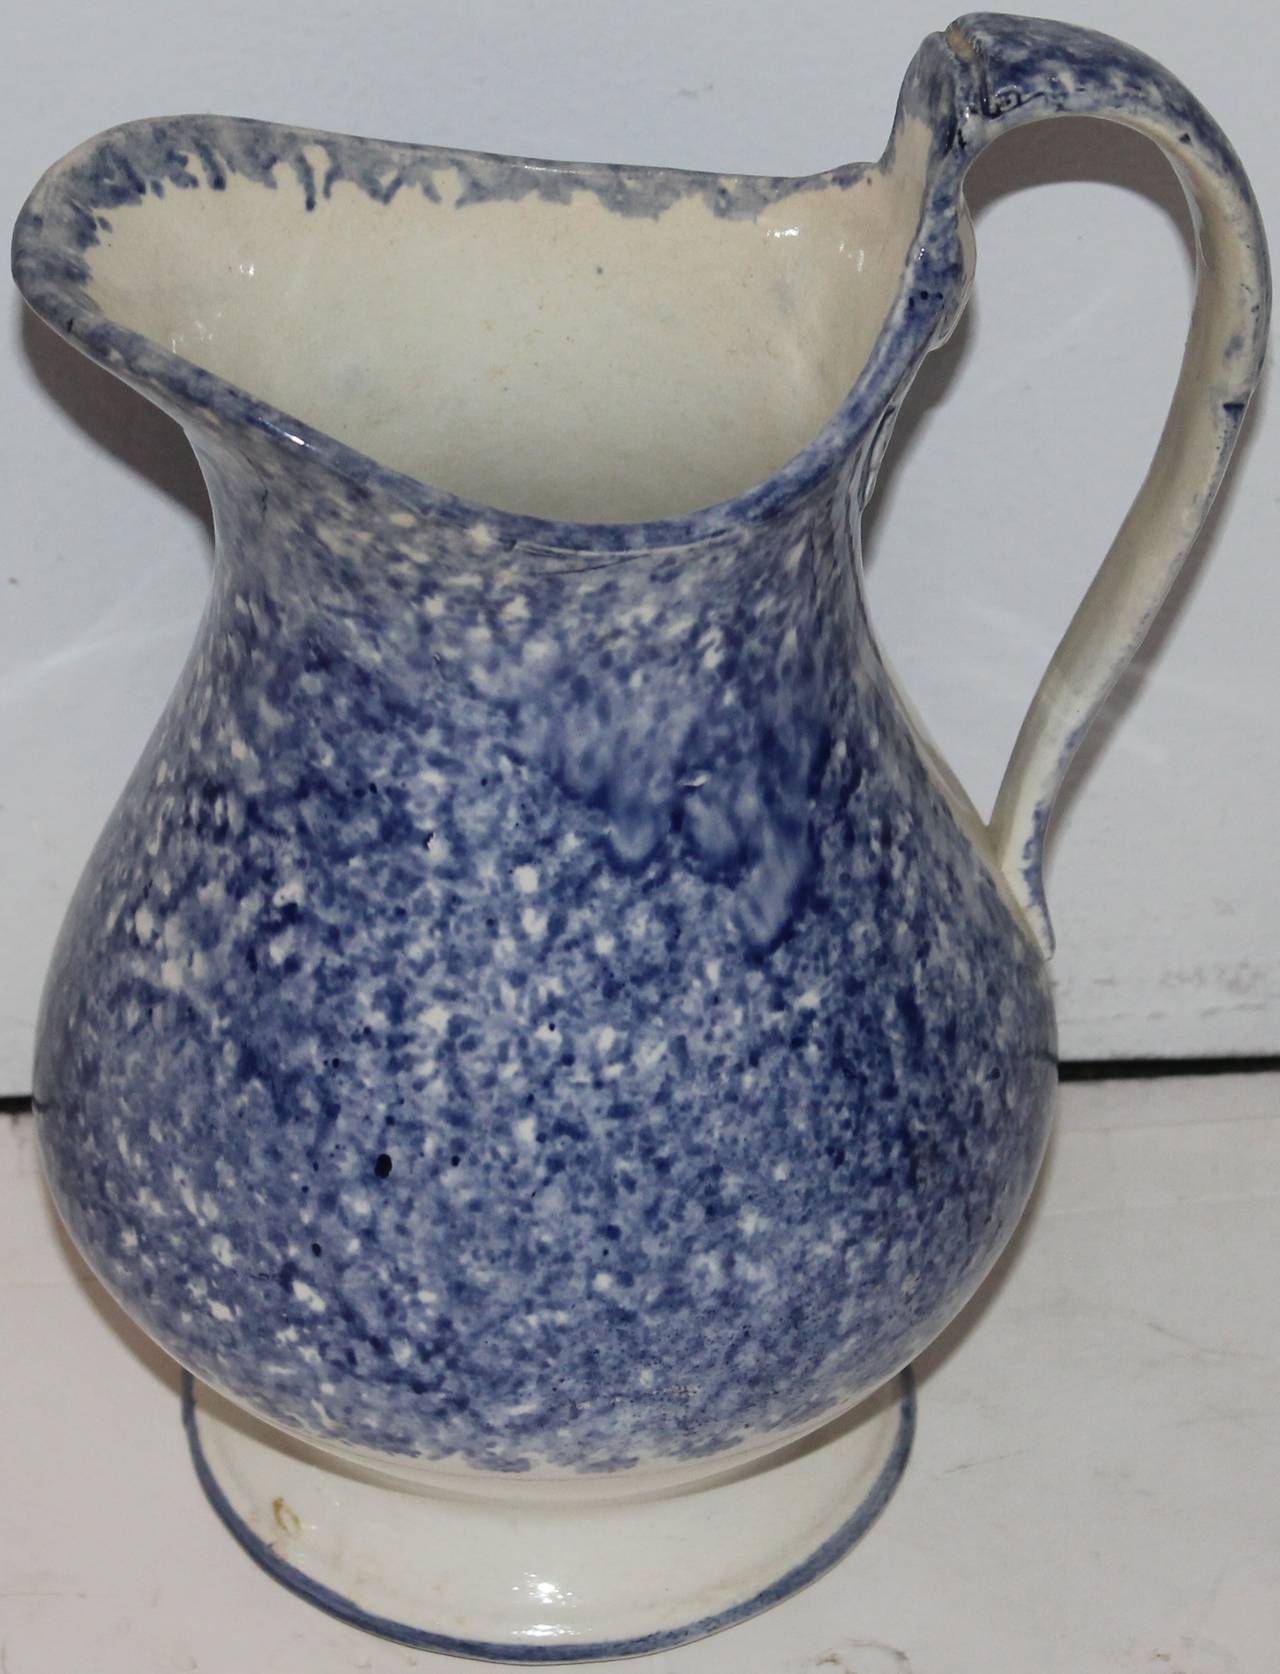 This is quite unusual and very early. The feeling of the pottery is like a soft paste. It is much earlier then most. The color is fantastic. Great addition to any spatter or sponge collection. This is a handmade and painted glazed pitcher.